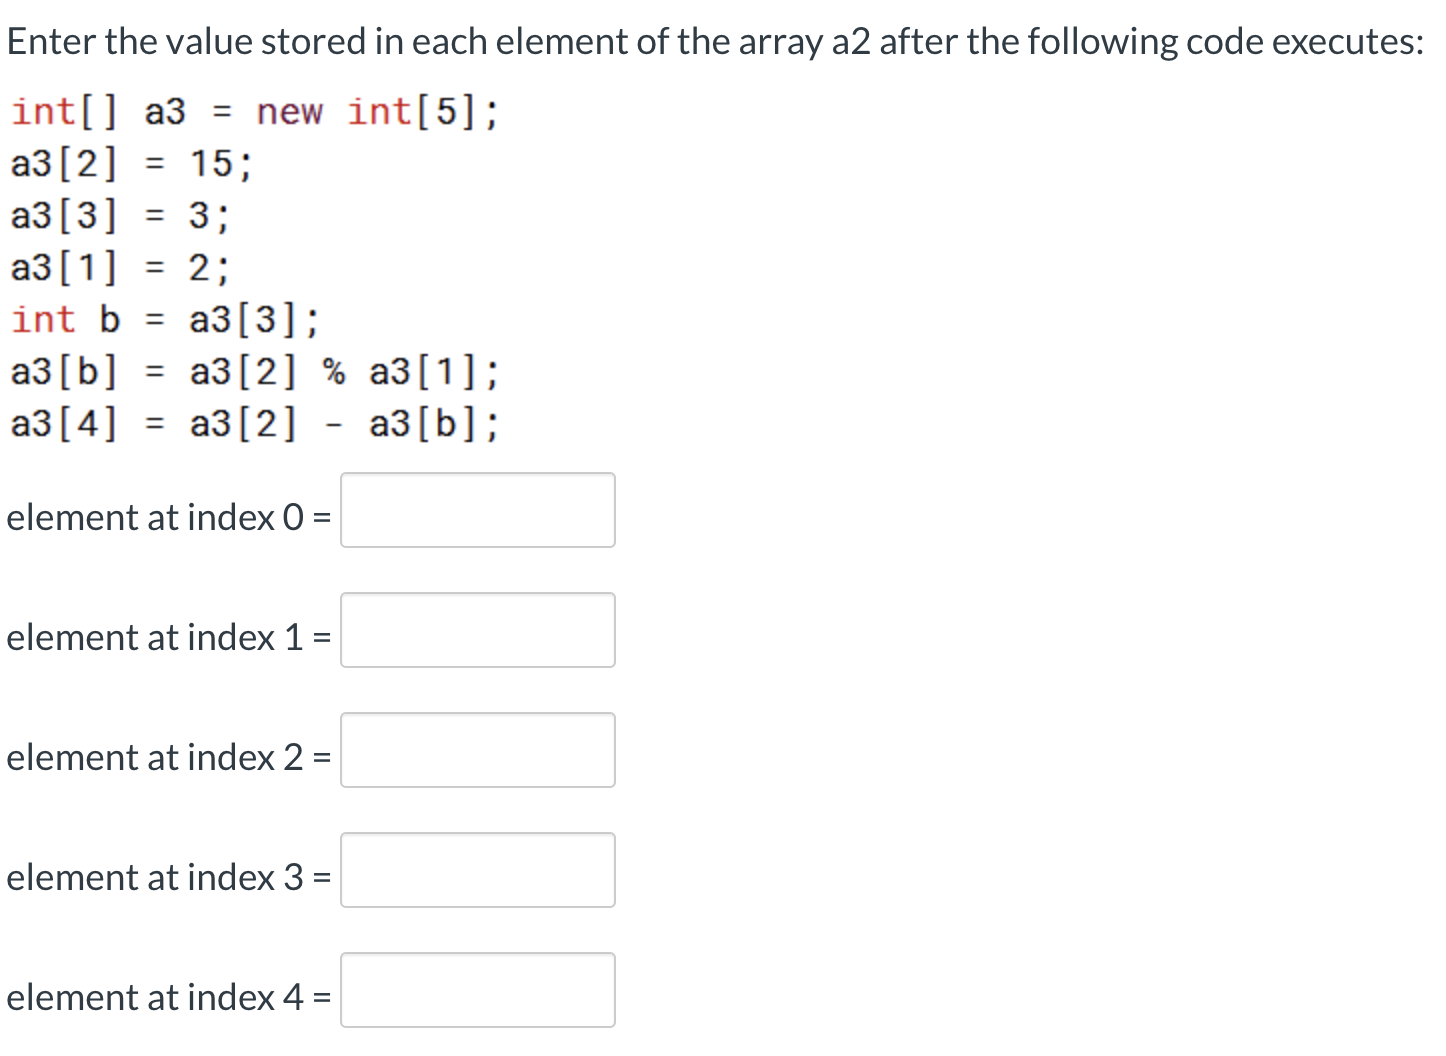 Enter the value stored in each element of the array a2 after the following code executes:
int[] a3 = new int[5];
a3[2] = 15;
a3[3] = 3;
a3[1] = 2;
int b = a3[3];
аз [b] %3D аз[2] %% аз[1];
аз [4] %3D - аз[b];
%3D
аз [2]
element at index 0 =
element at index 1 =
element at index 2 =
%3D
element at index 3 =
element at index 4 =
